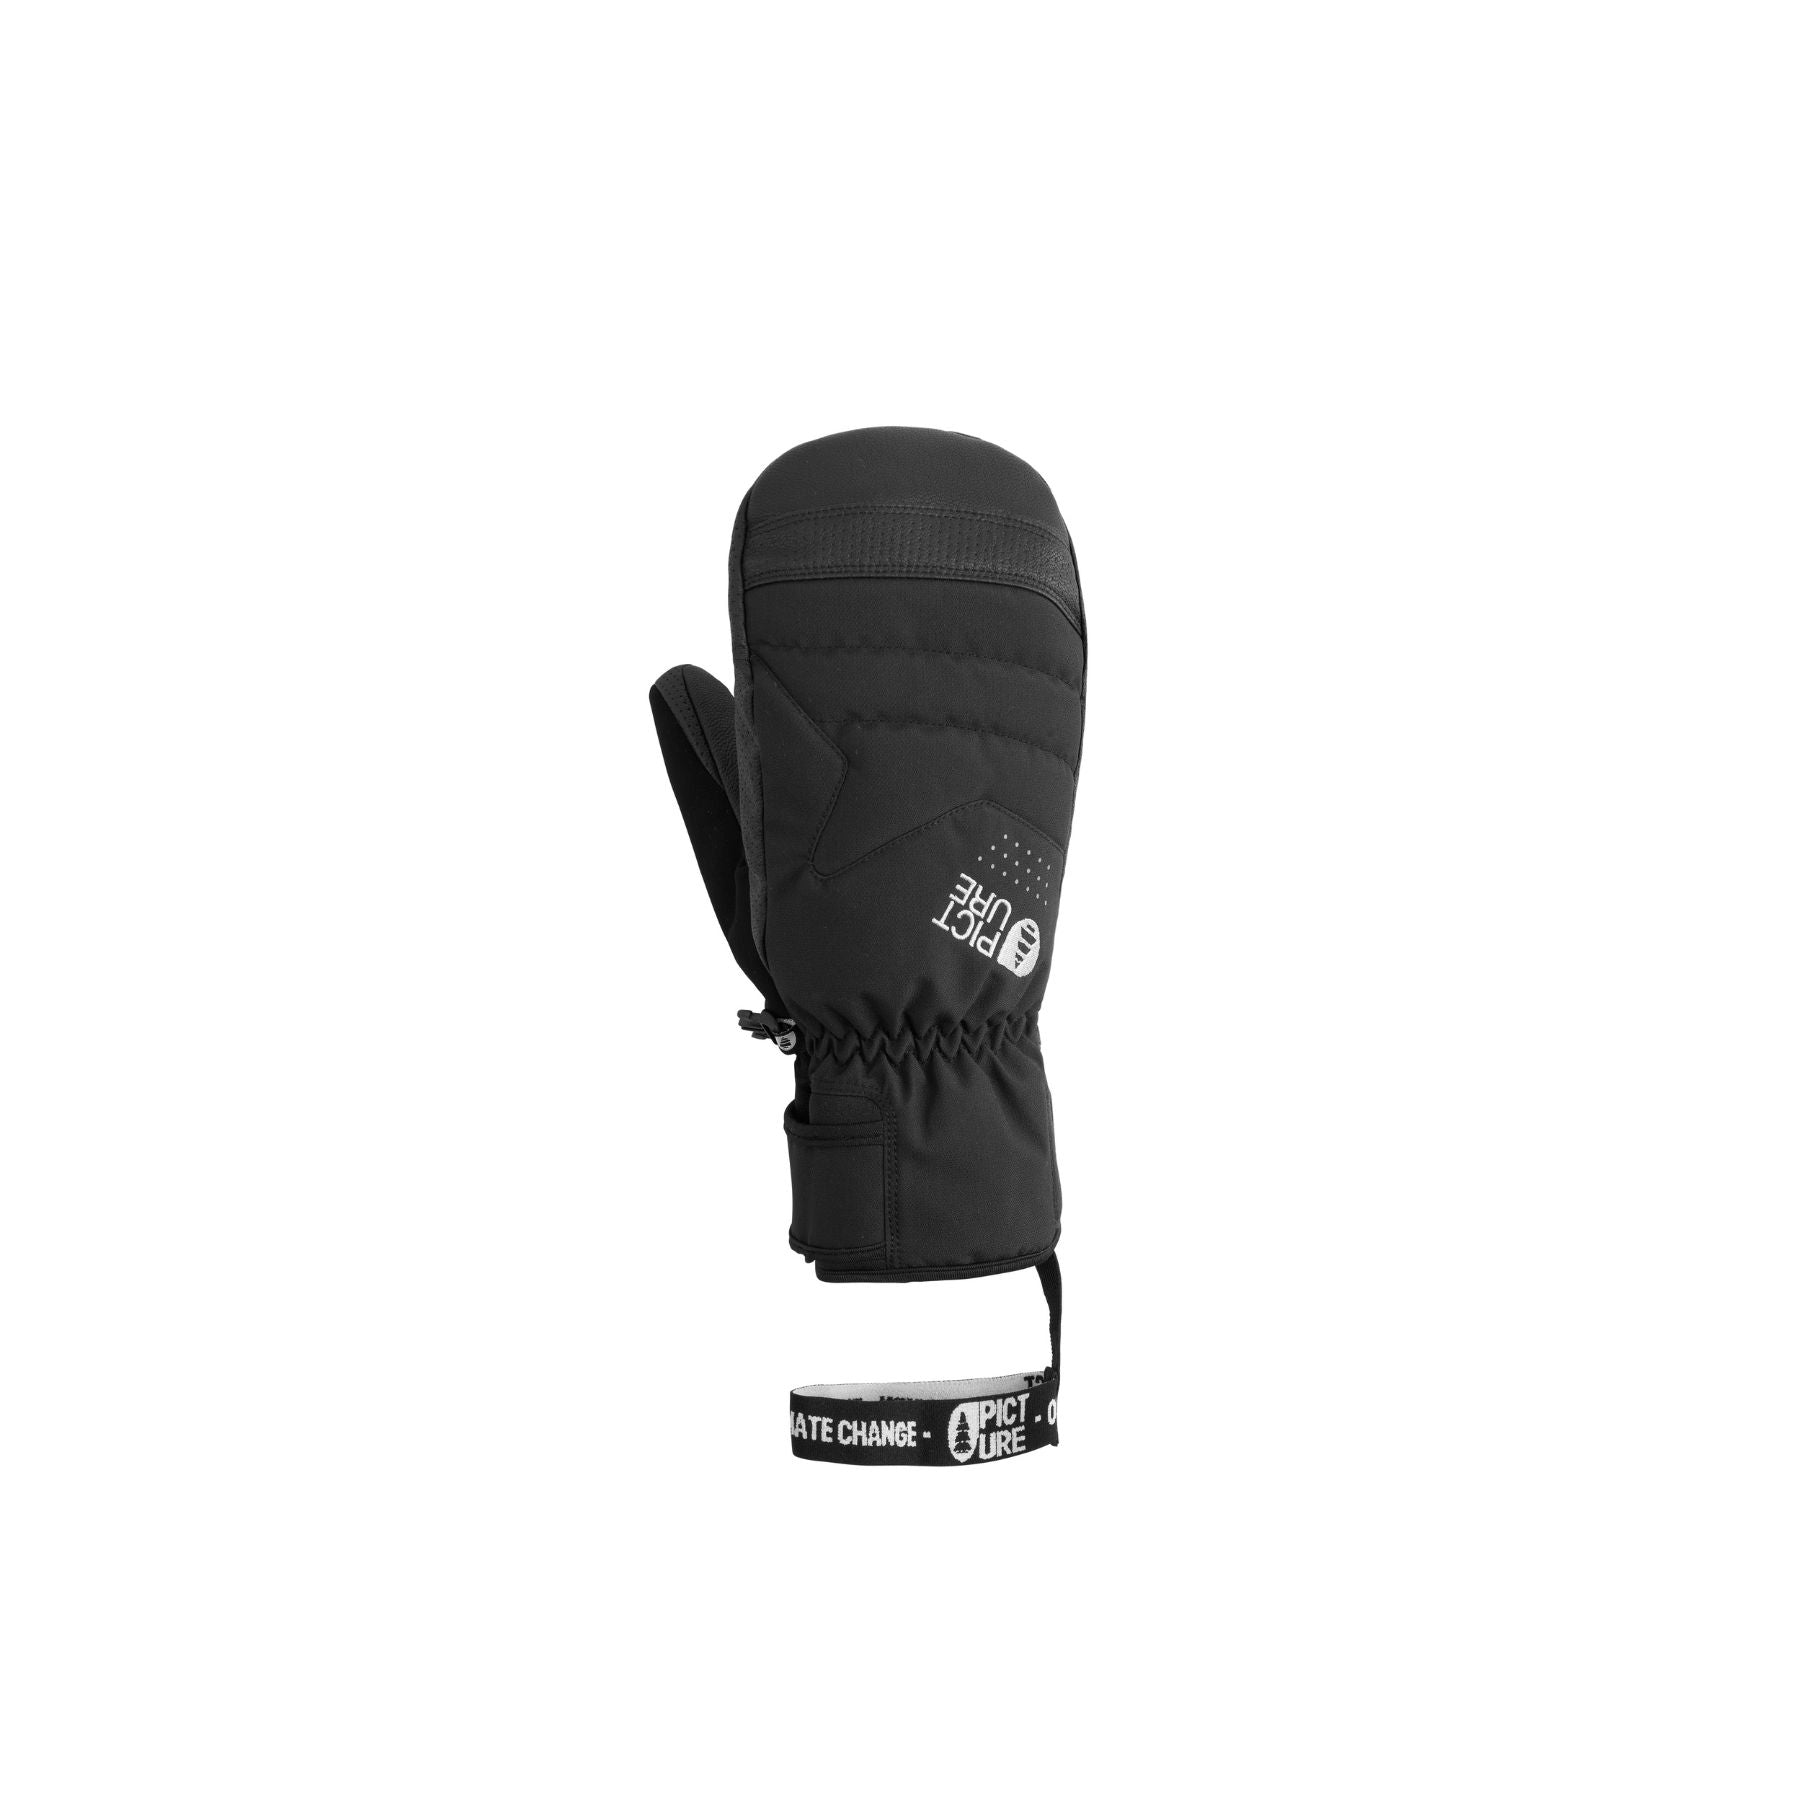 Picture Caldwell Mitts in Black